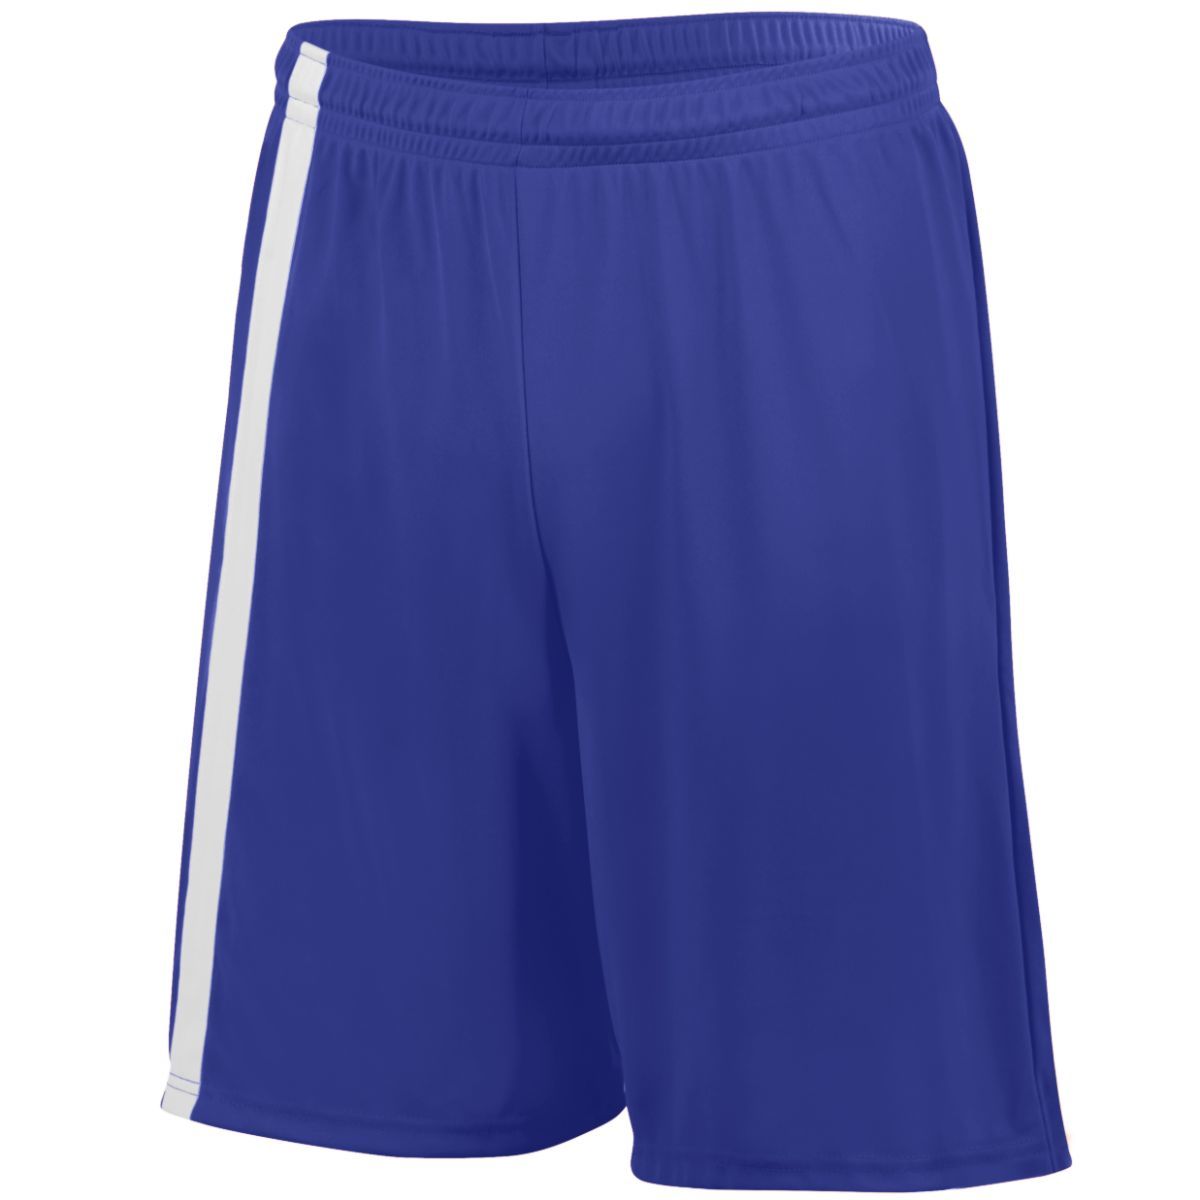 Augusta Sportswear Youth Attacking Third Shorts in Purple/White  -Part of the Youth, Youth-Shorts, Augusta-Products, Soccer, All-Sports-1 product lines at KanaleyCreations.com